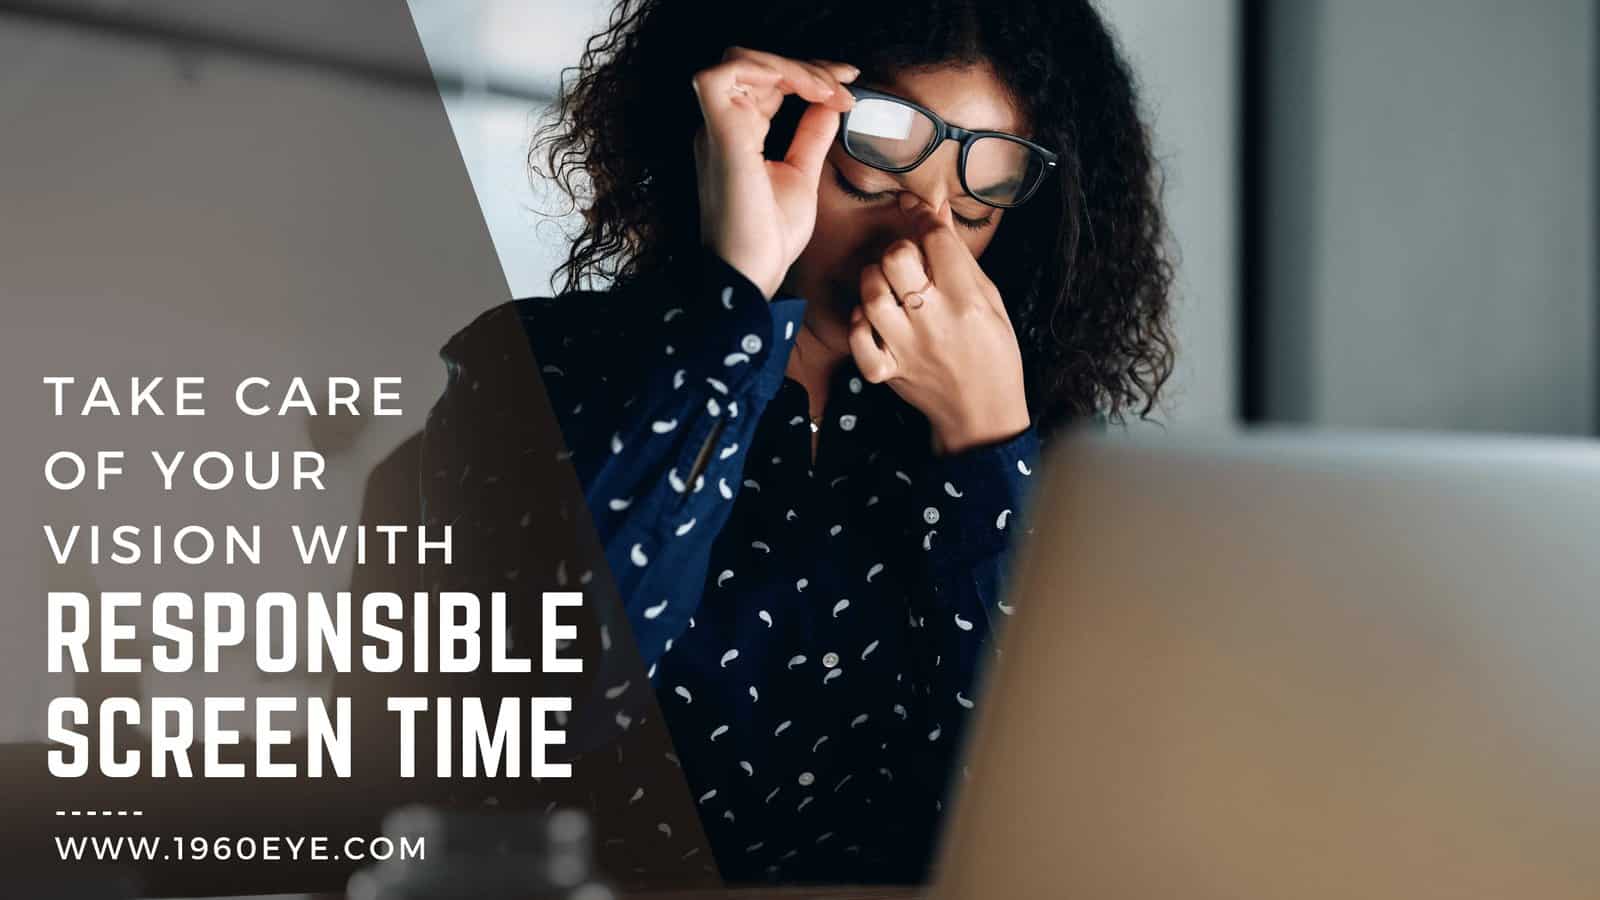 Take Care of Your Vision with Responsible Screen Time